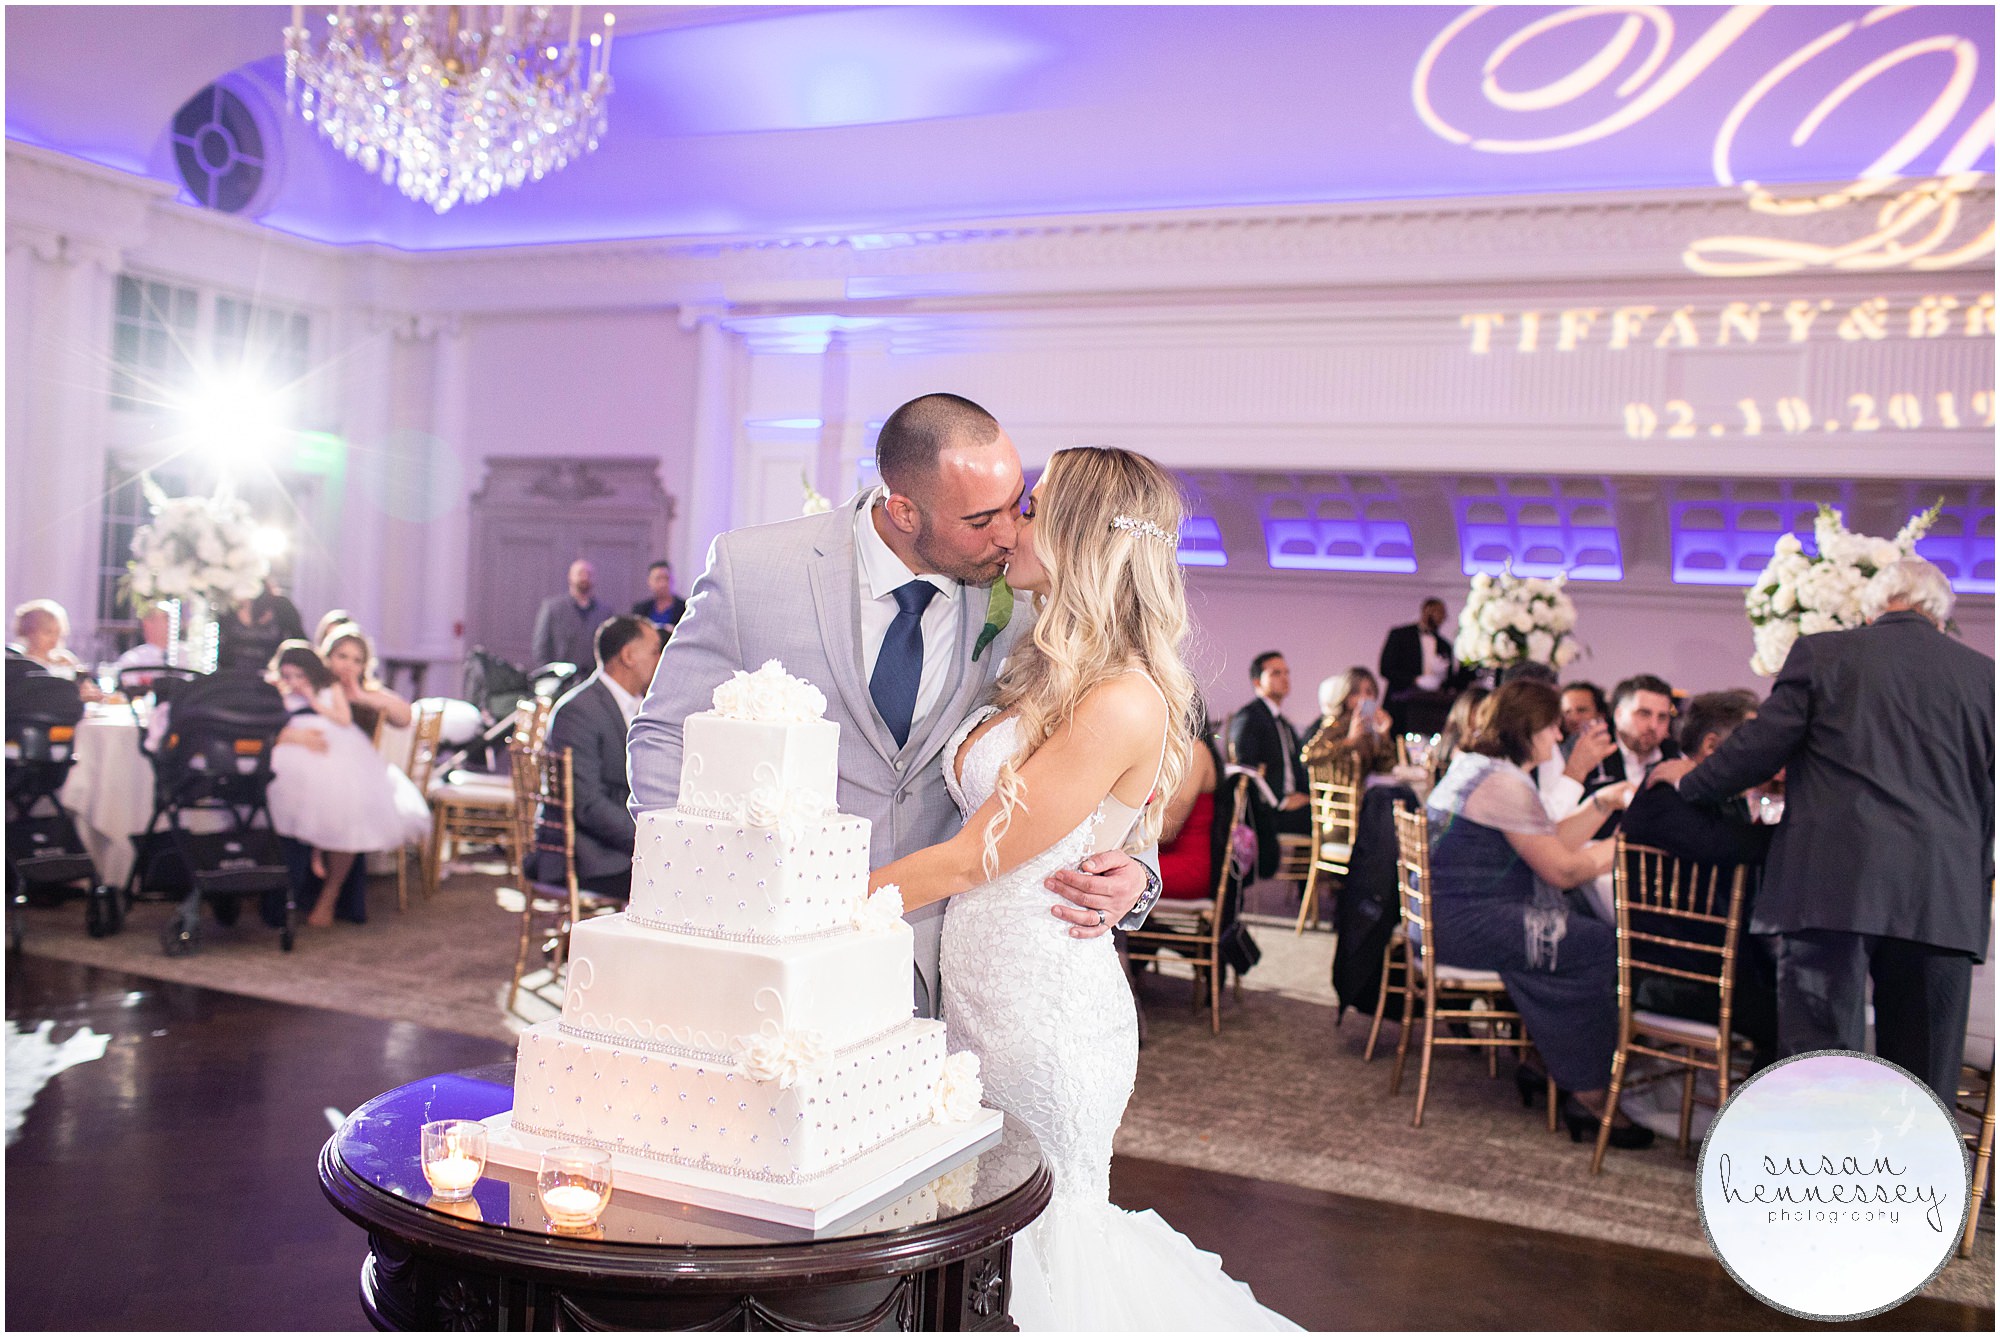 A bride and groom share a kiss after cutting their wedding cake.